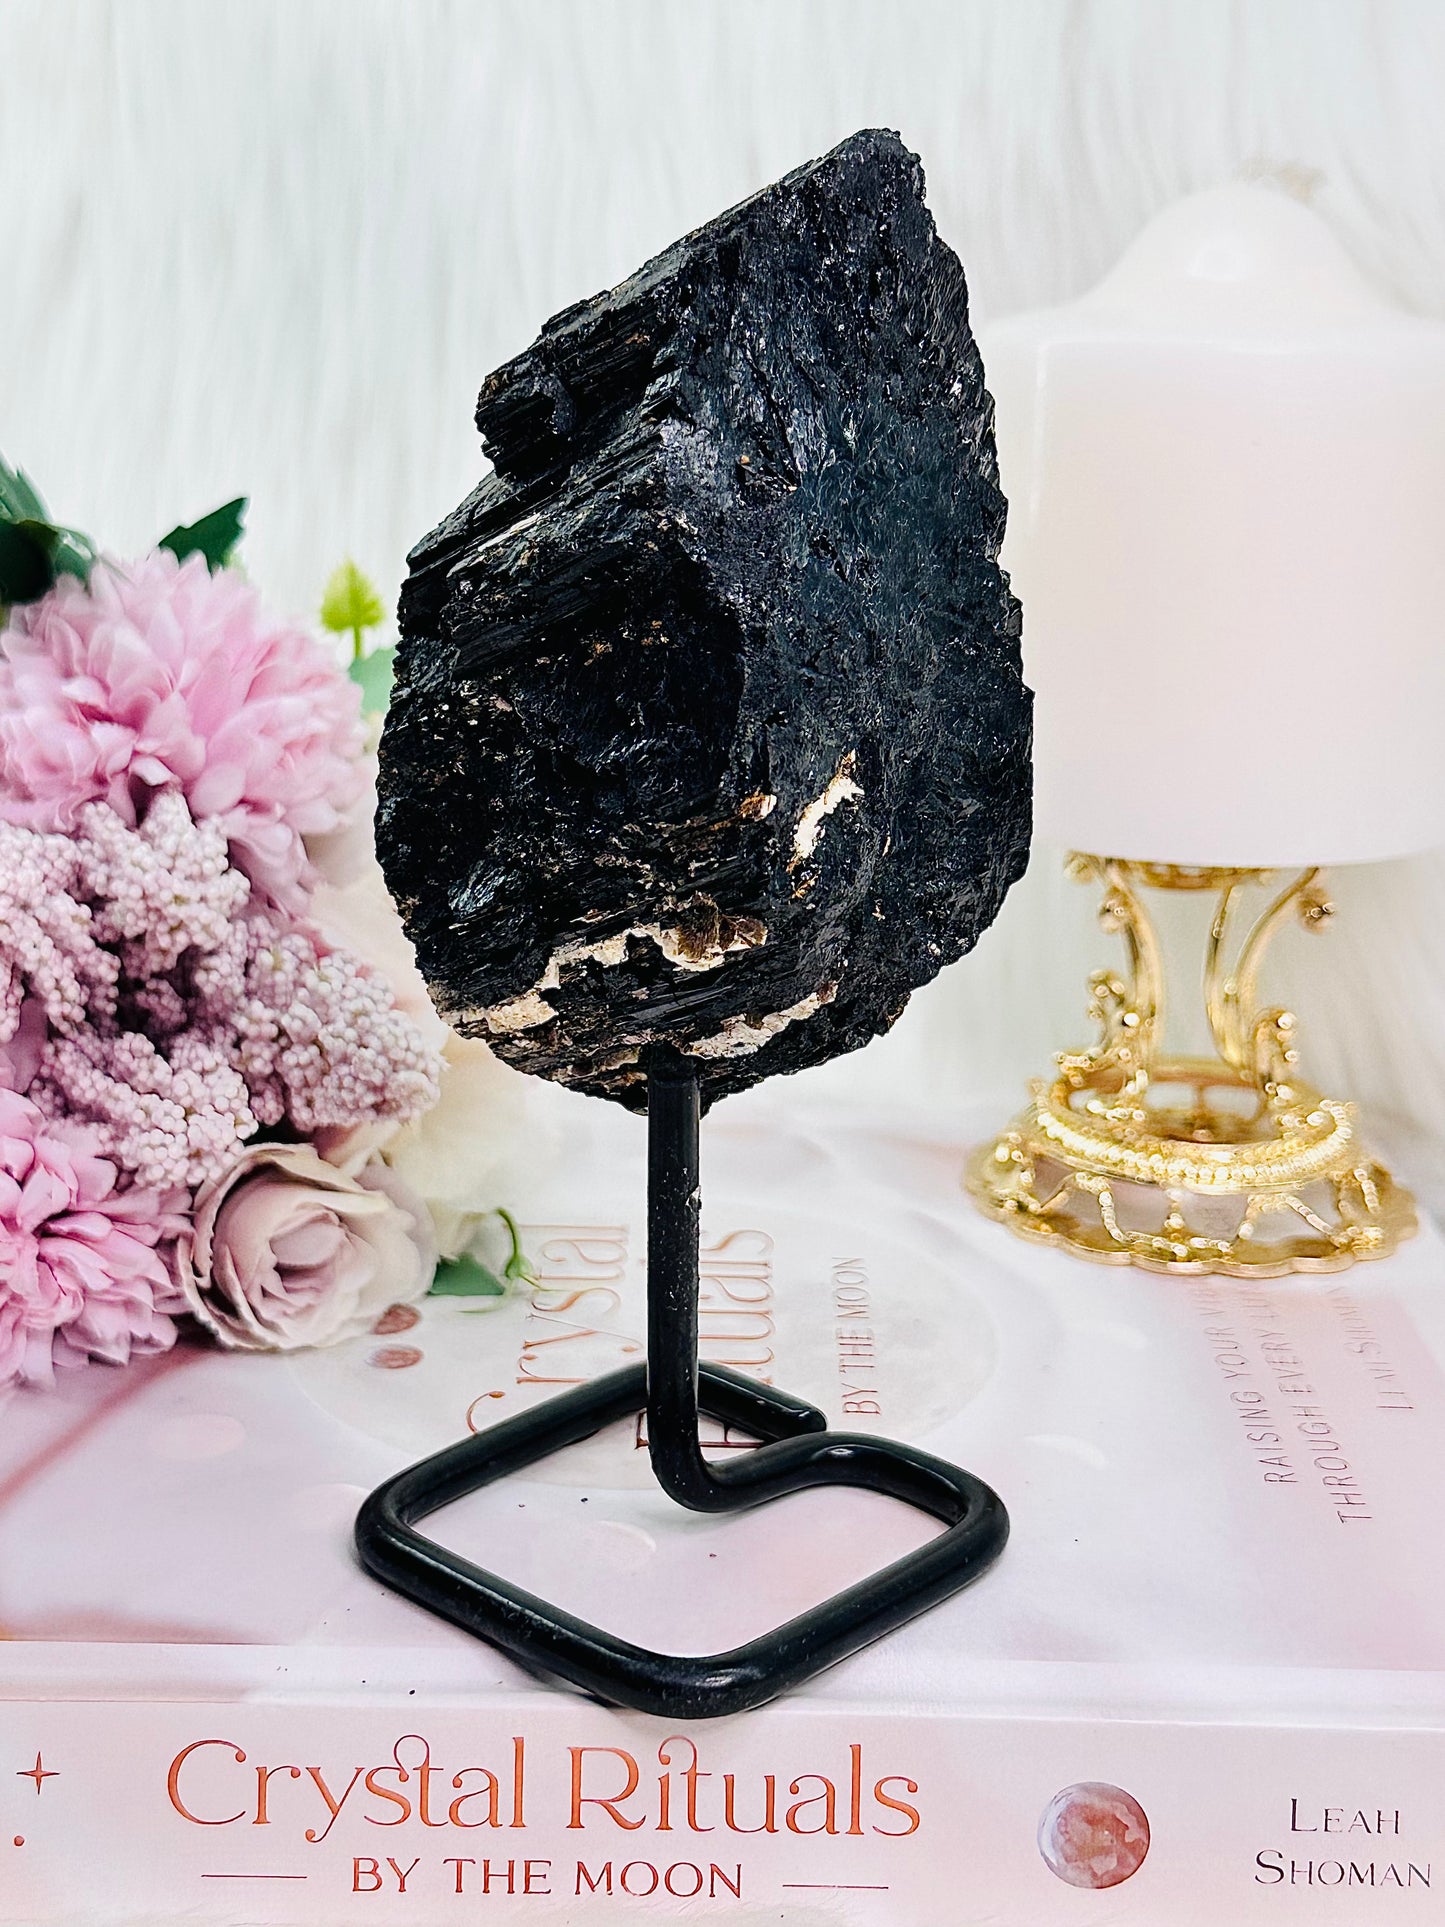 ⚜️ SALE ⚜️ Highly Protective Stone For Your Home ~ Amazing Large Natural Raw Black Tourmaline Specimen On Stand 623grams